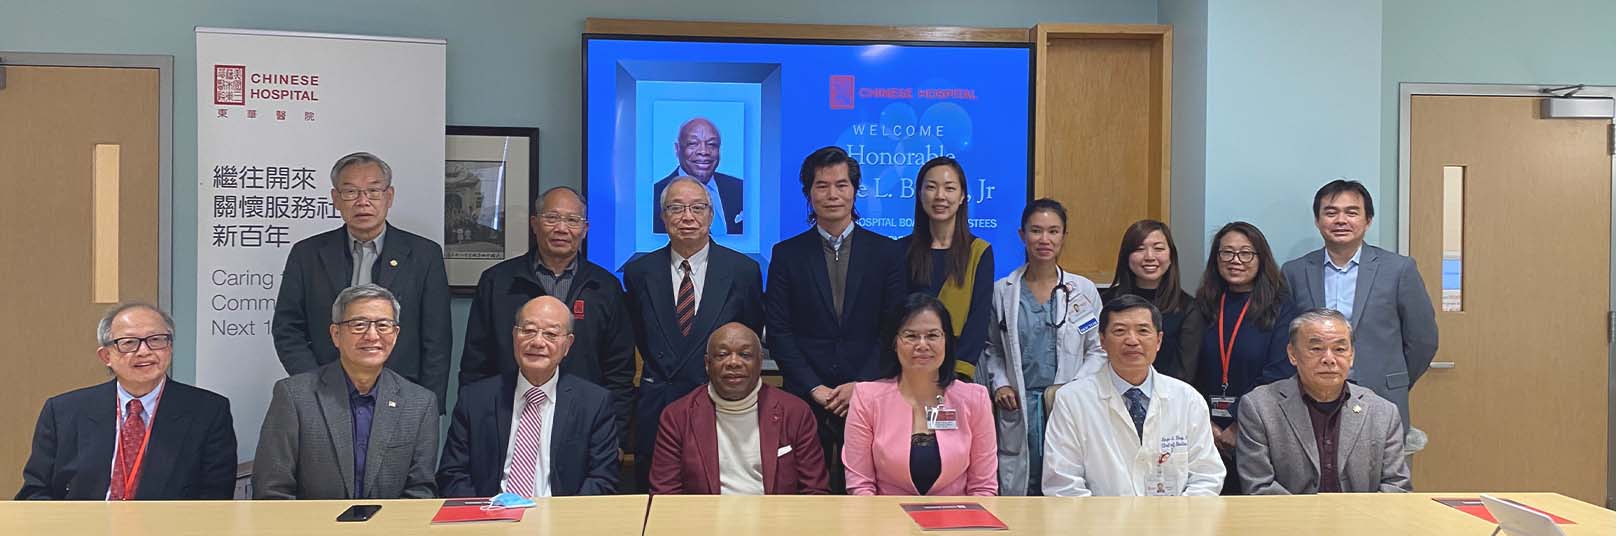 Honorable Willie L. Brown, Jr Accepts Board Advisor Role at Chinese Hospital